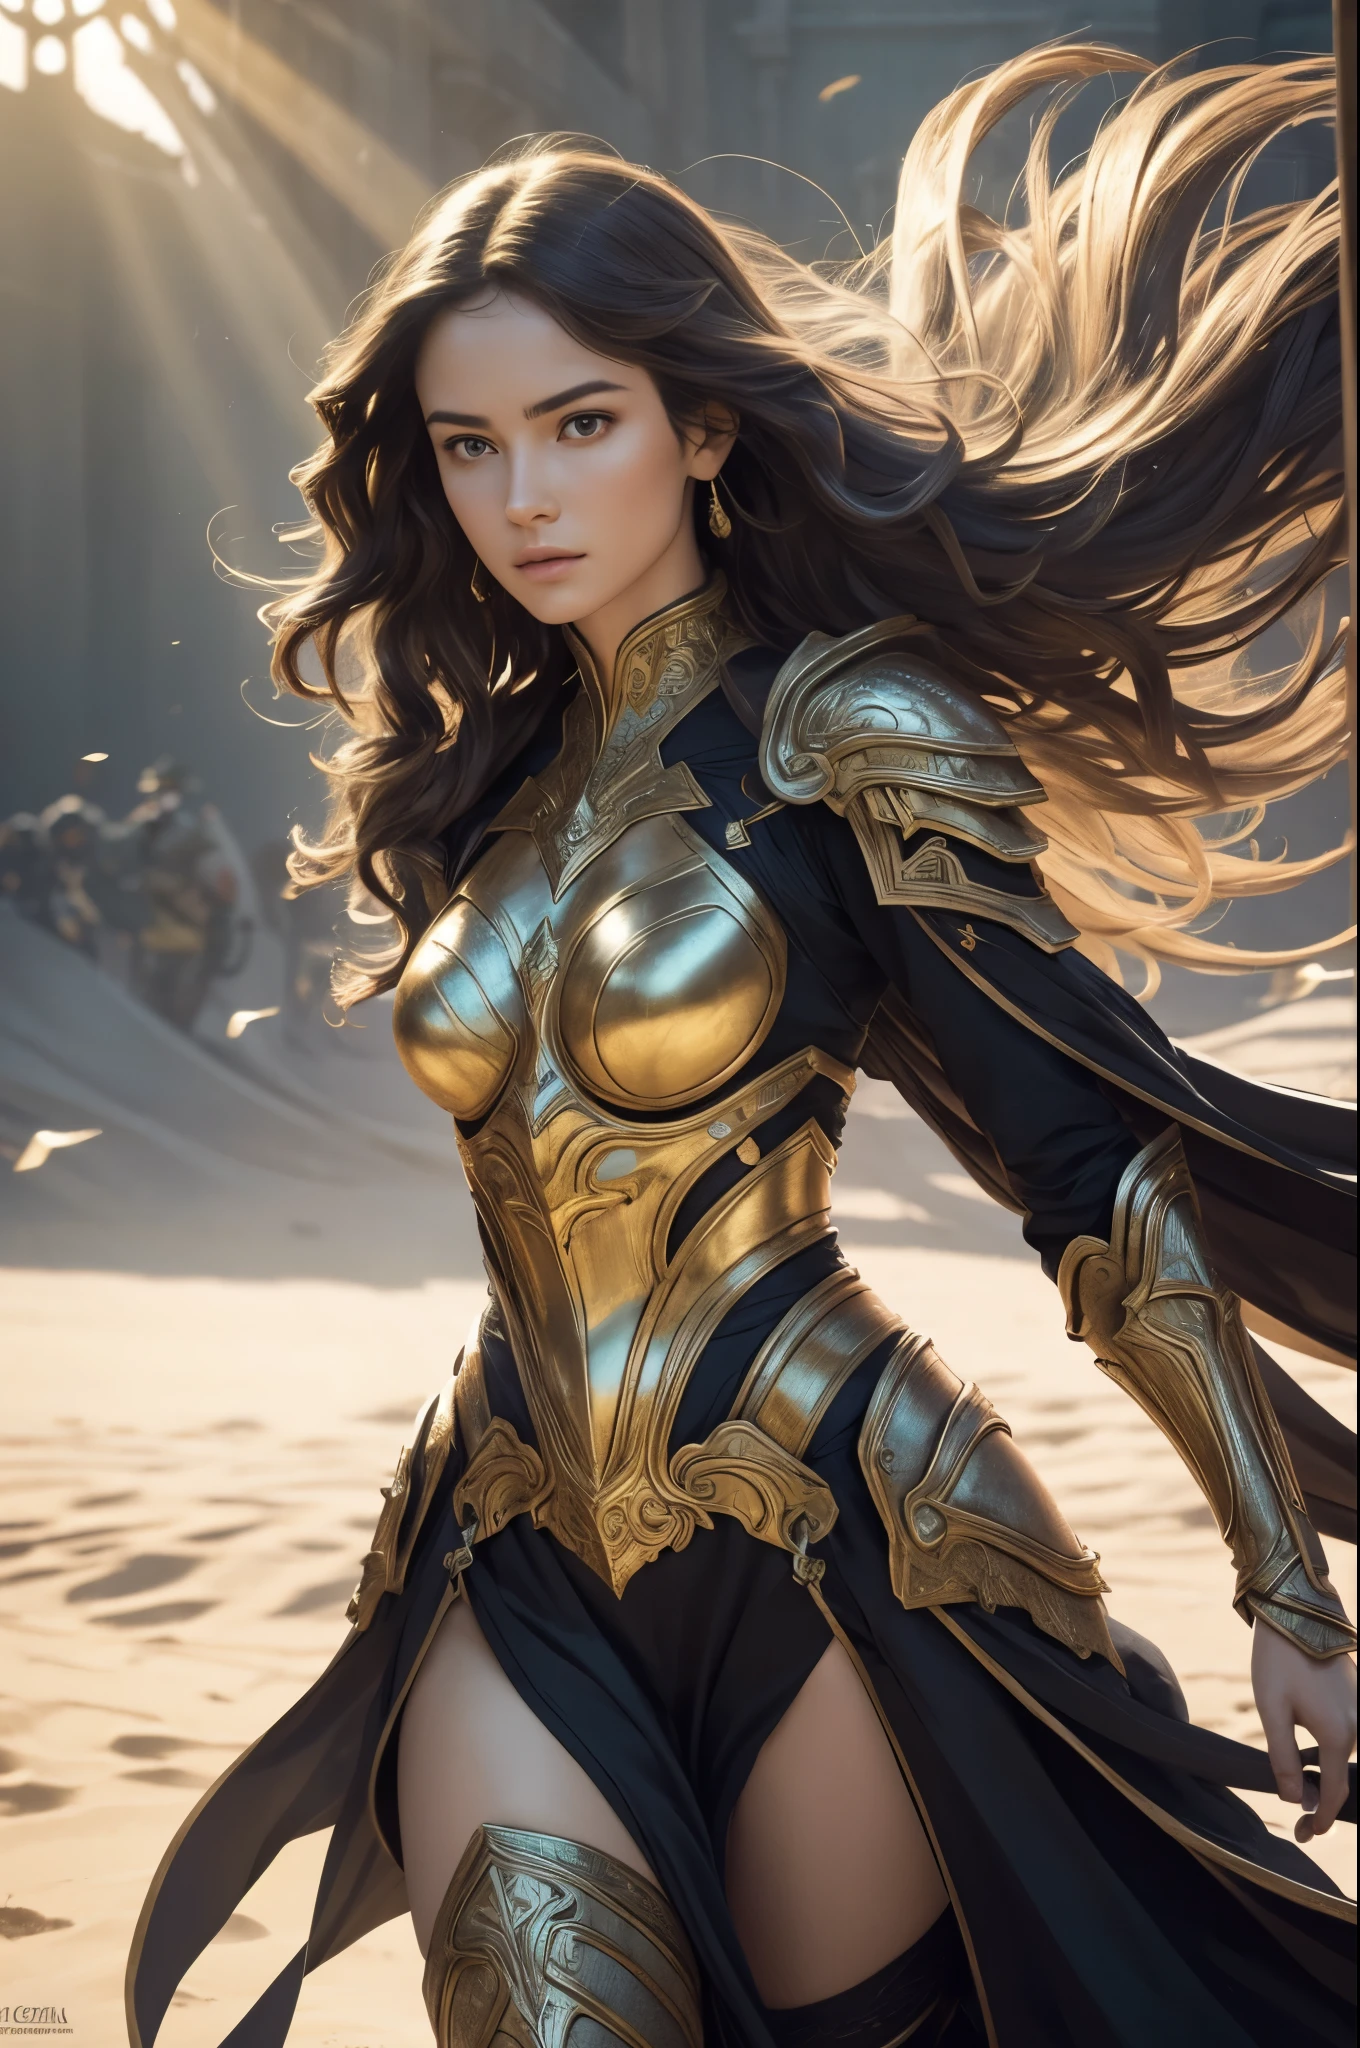 award winning concept art of tall (1girl) in ornate armor , model on runway, epic, god rays, centered, (masterpiece:1.2), (best quality:1.2), Amazing, highly detailed, beautiful, finely detail, warm soft color grading, Depth of field, extremely detailed 8k, fine art, stunning, iridescent, shiny, light reflections, crisp, curls, wind, flying sand, dynamic pose, hyper realism, vibrant, sunlit, edge detection